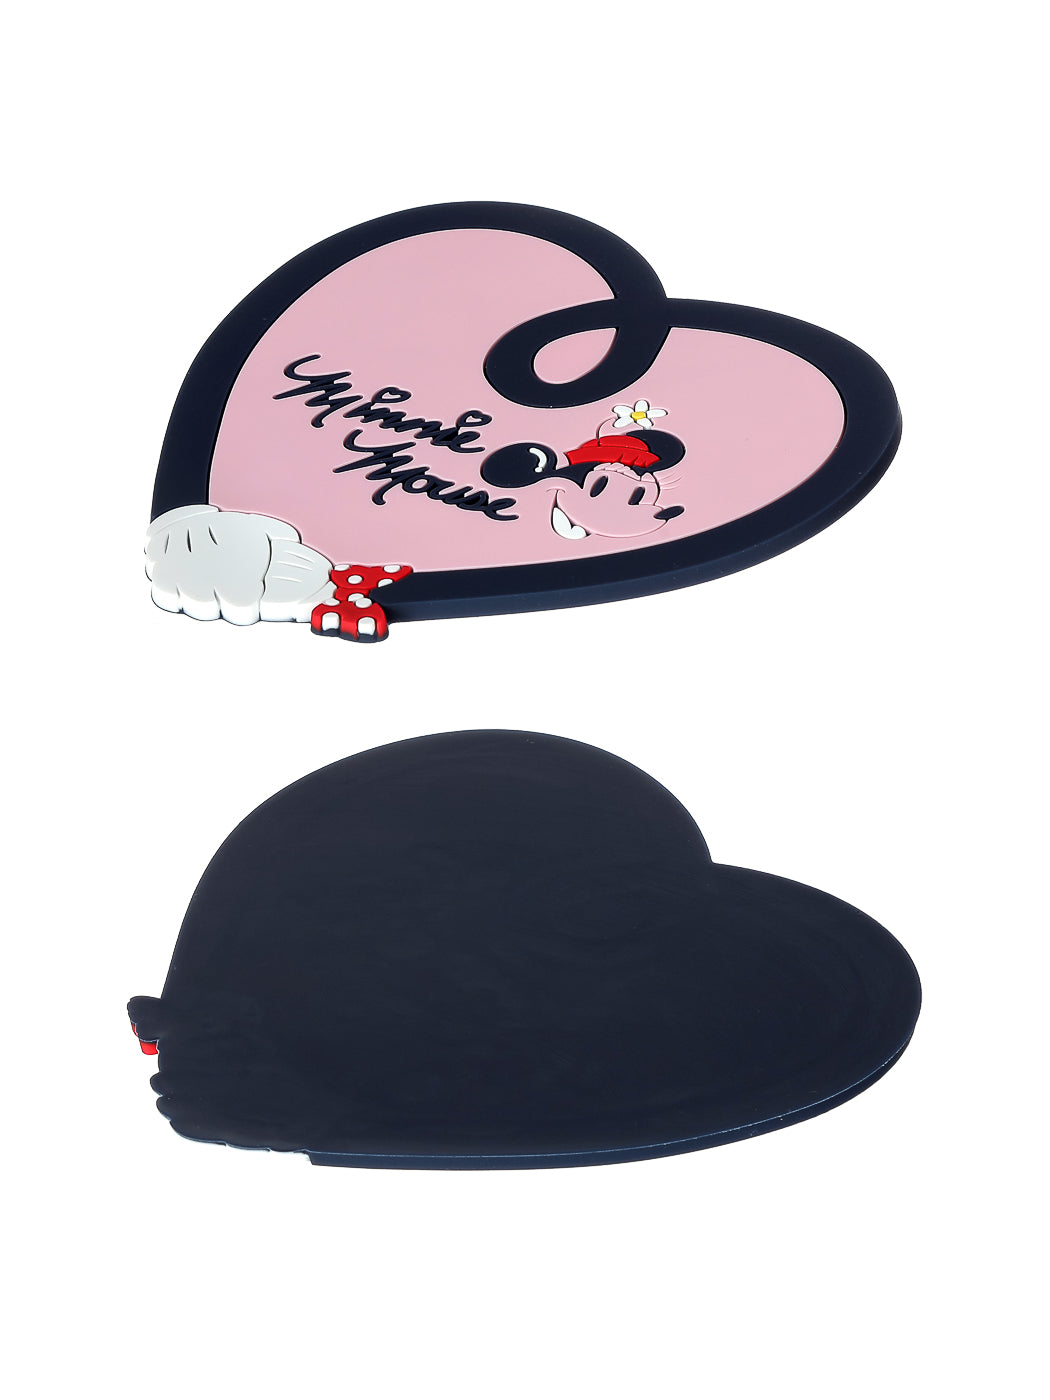 MINISO MICKEY MOUSE COLLECTION2.0 CUP MAT(MINNIE MOUSE) 2010538512102 GLASS CUP MAT